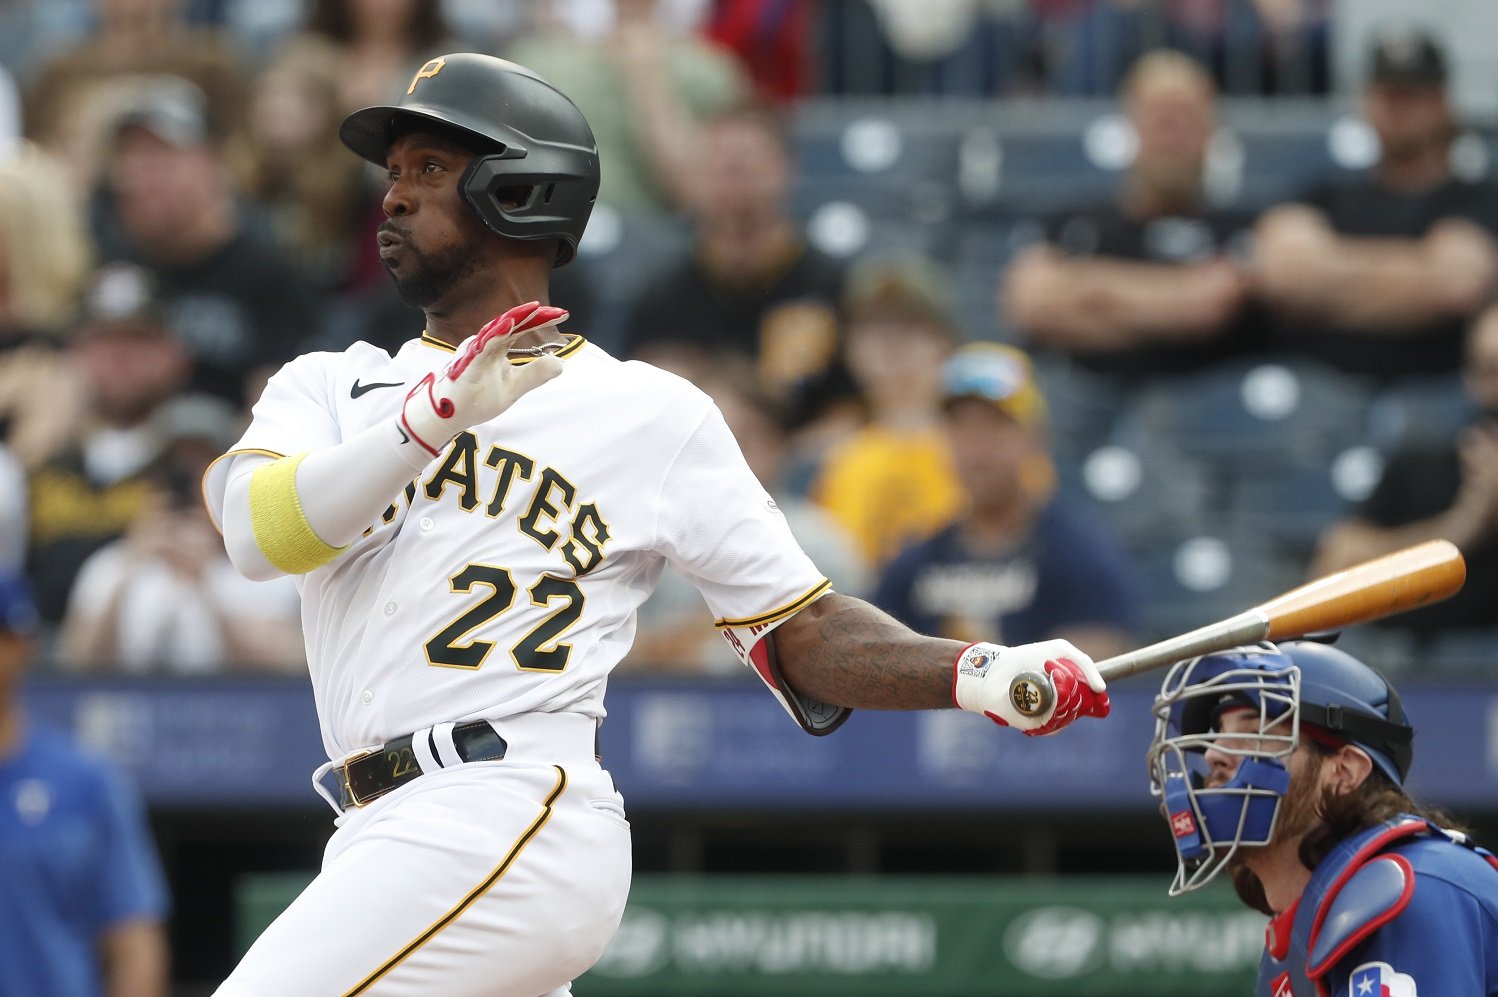 Blue Jays: The argument for and against signing OF/DH Andrew McCutchen